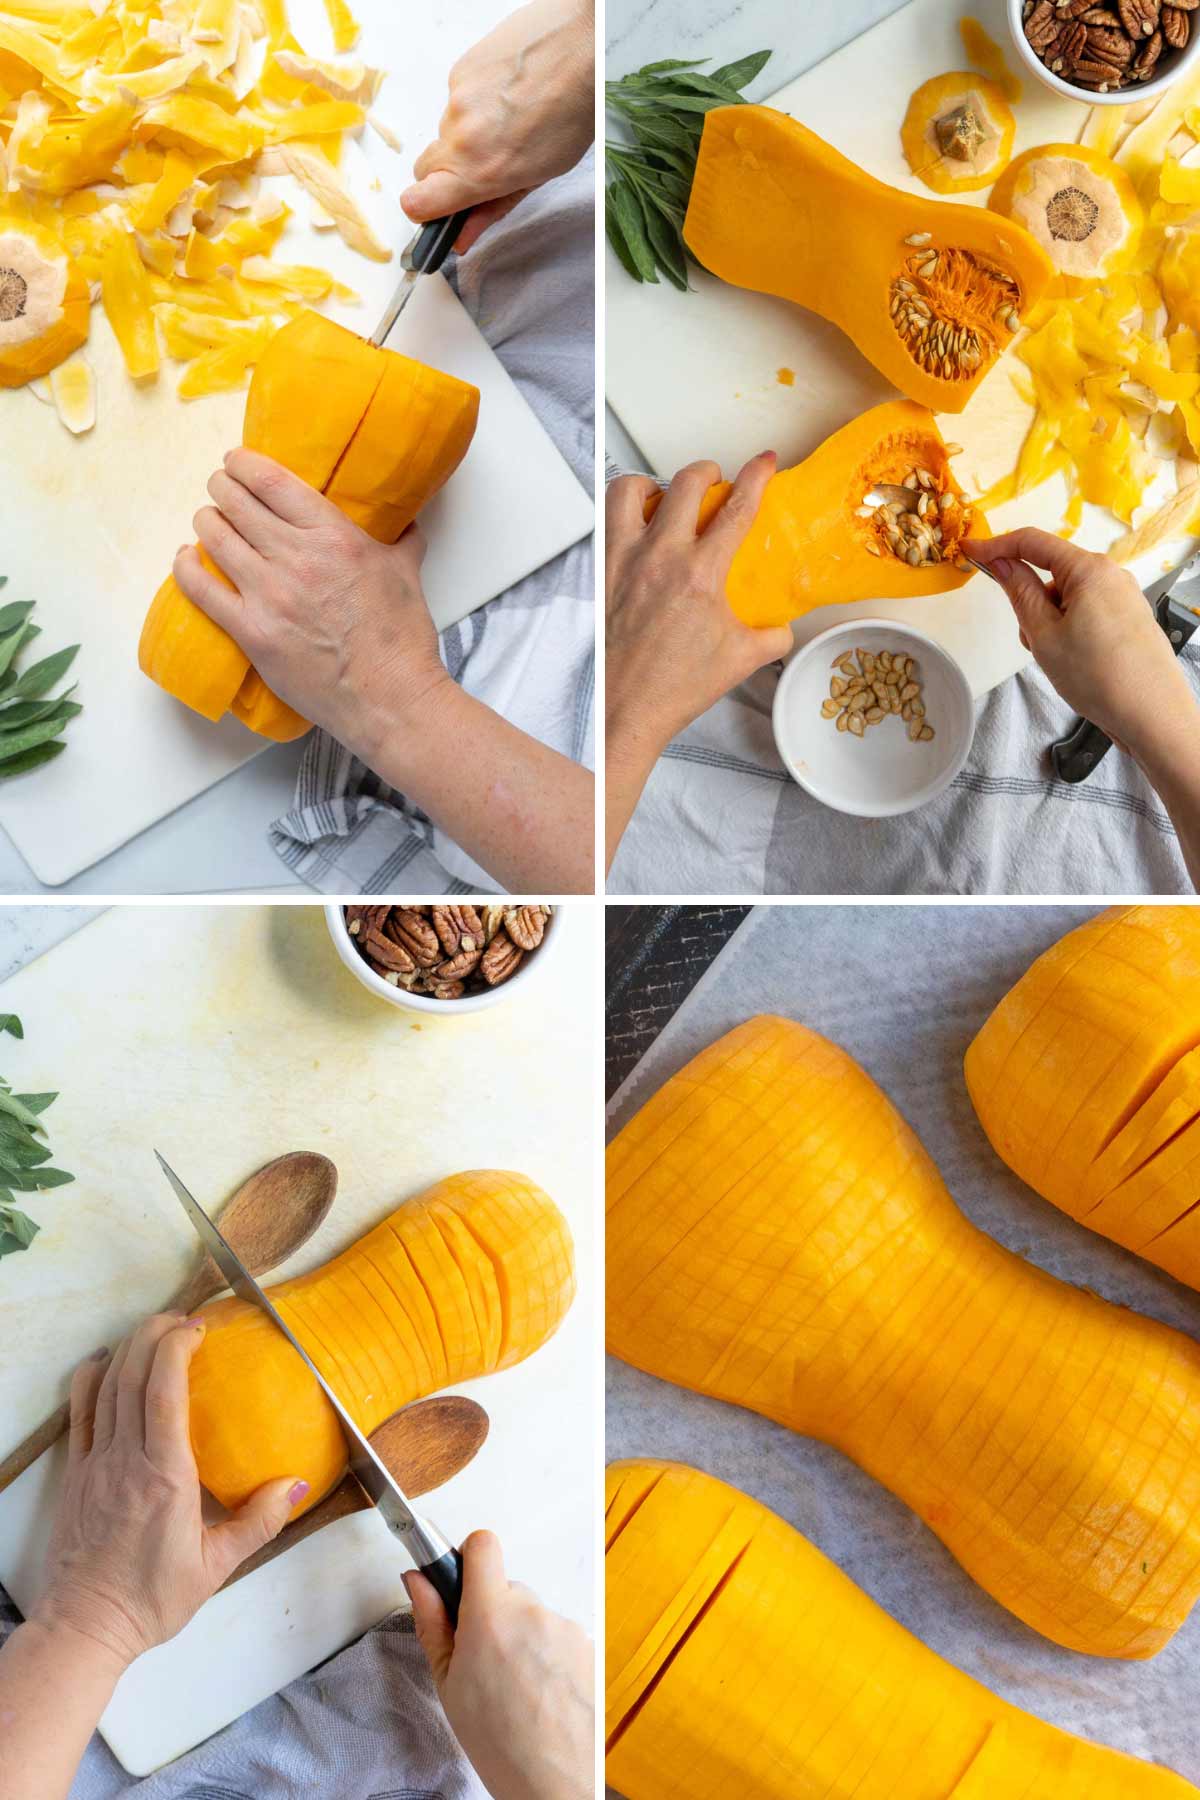 Cutting the squash and half and using two spoons to line up the hasselback cuts.